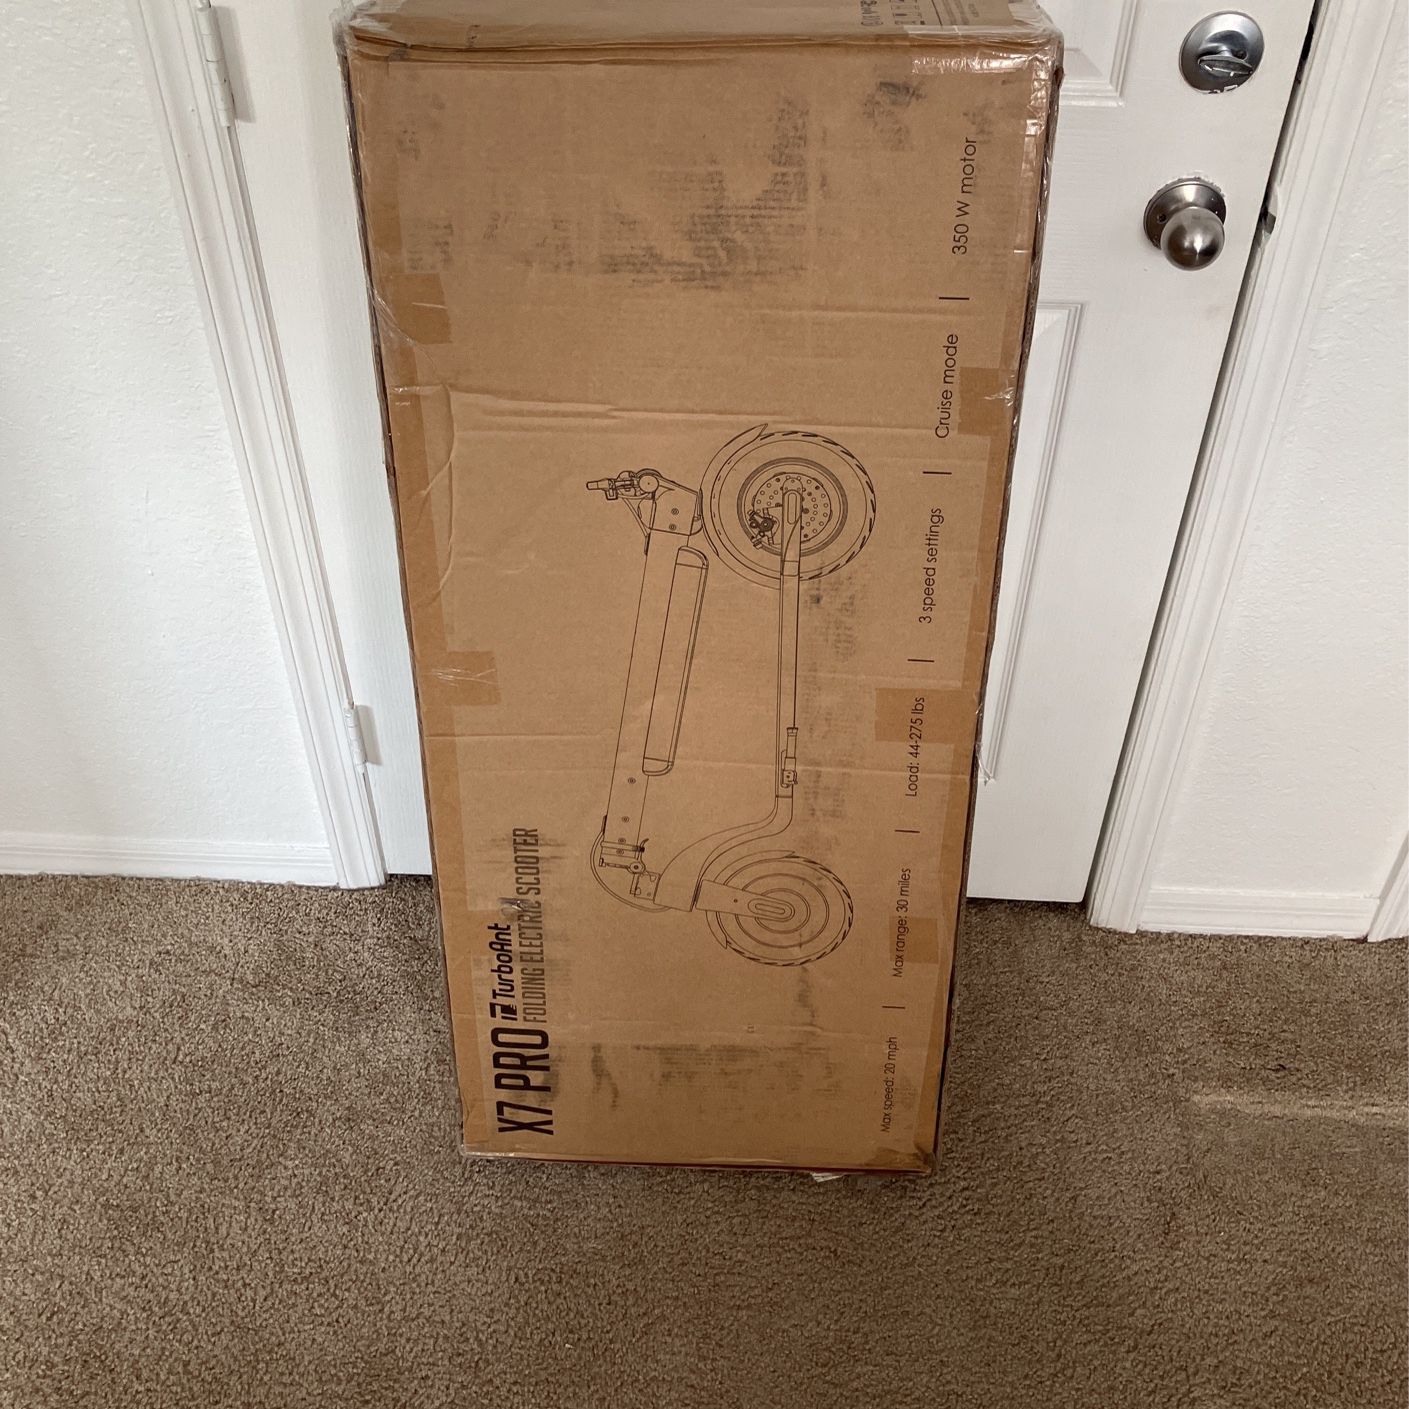 Brand New Turboant X7 Pro E-Scooter